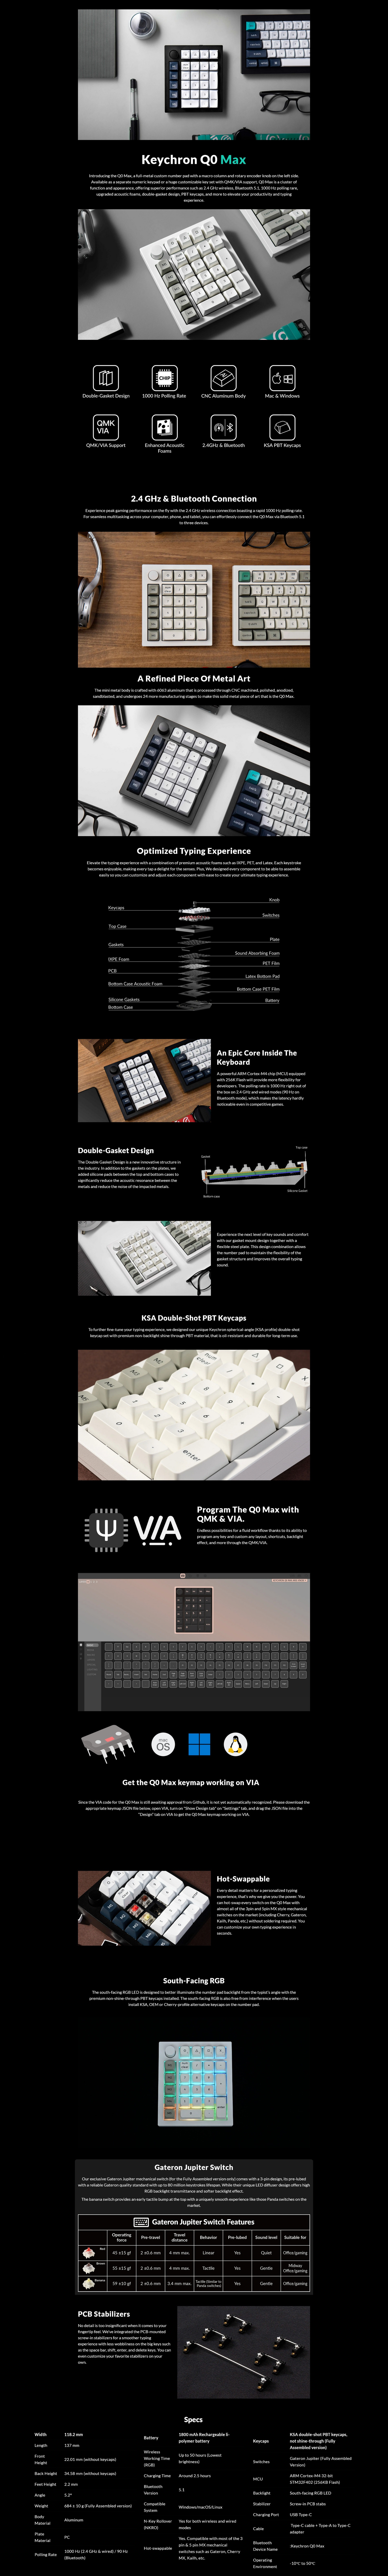 A large marketing image providing additional information about the product Keychron Q0 Max QMK/VIA Custom Wireless Number Pad - Black (Gateron Jupiter Brown Switches) - Additional alt info not provided